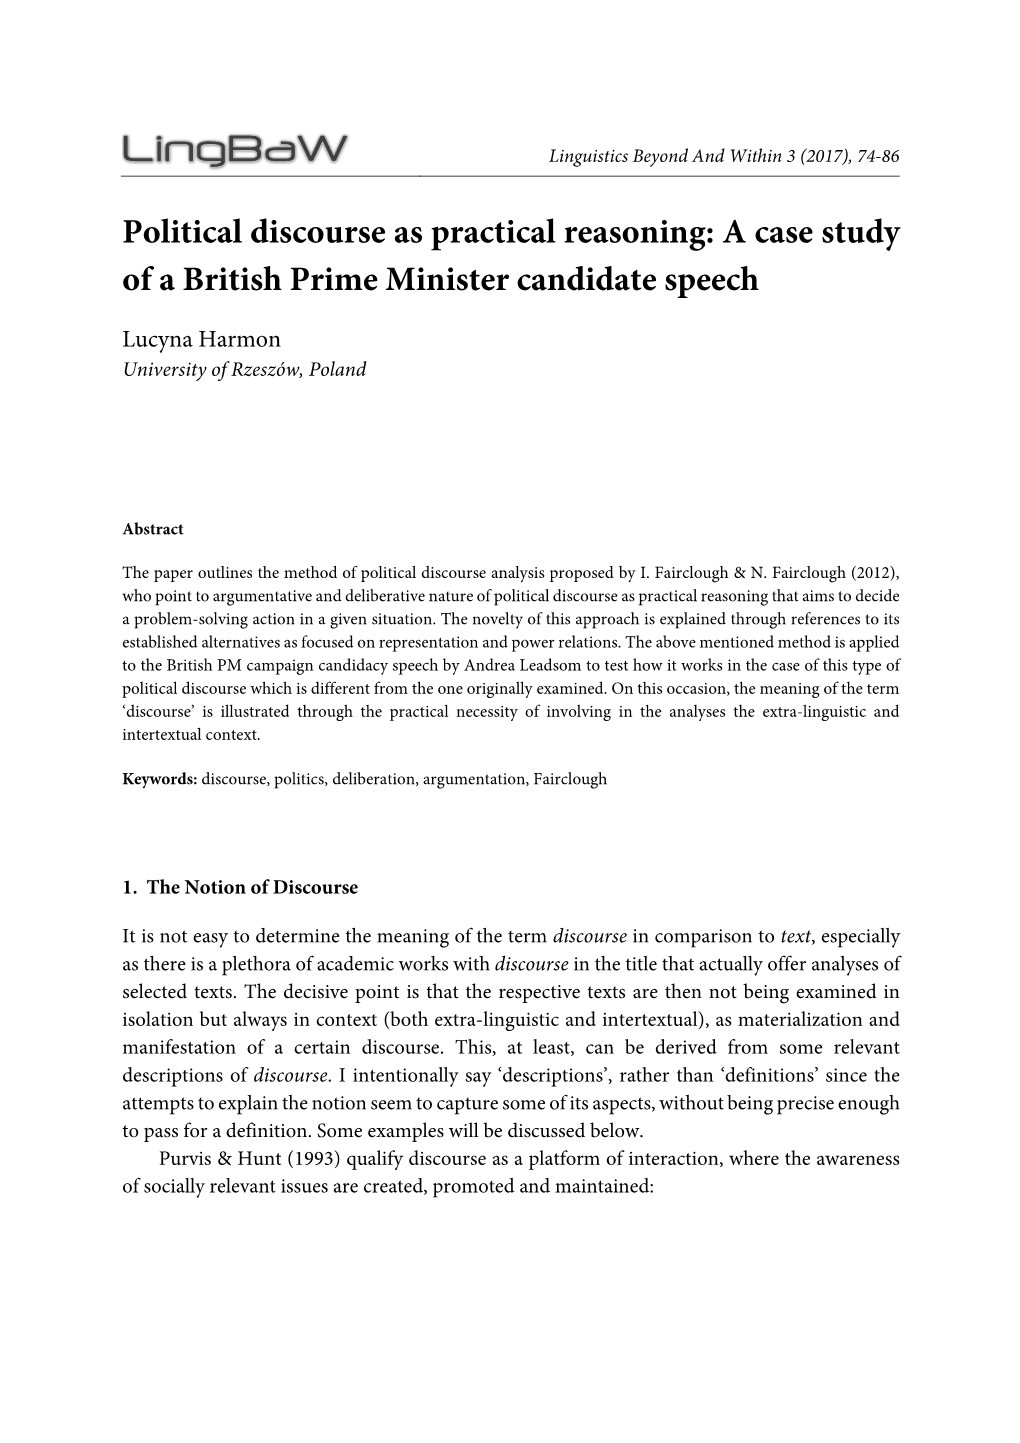 Political Discourse As Practical Reasoning: a Case Study of a British Prime Minister Candidate Speech